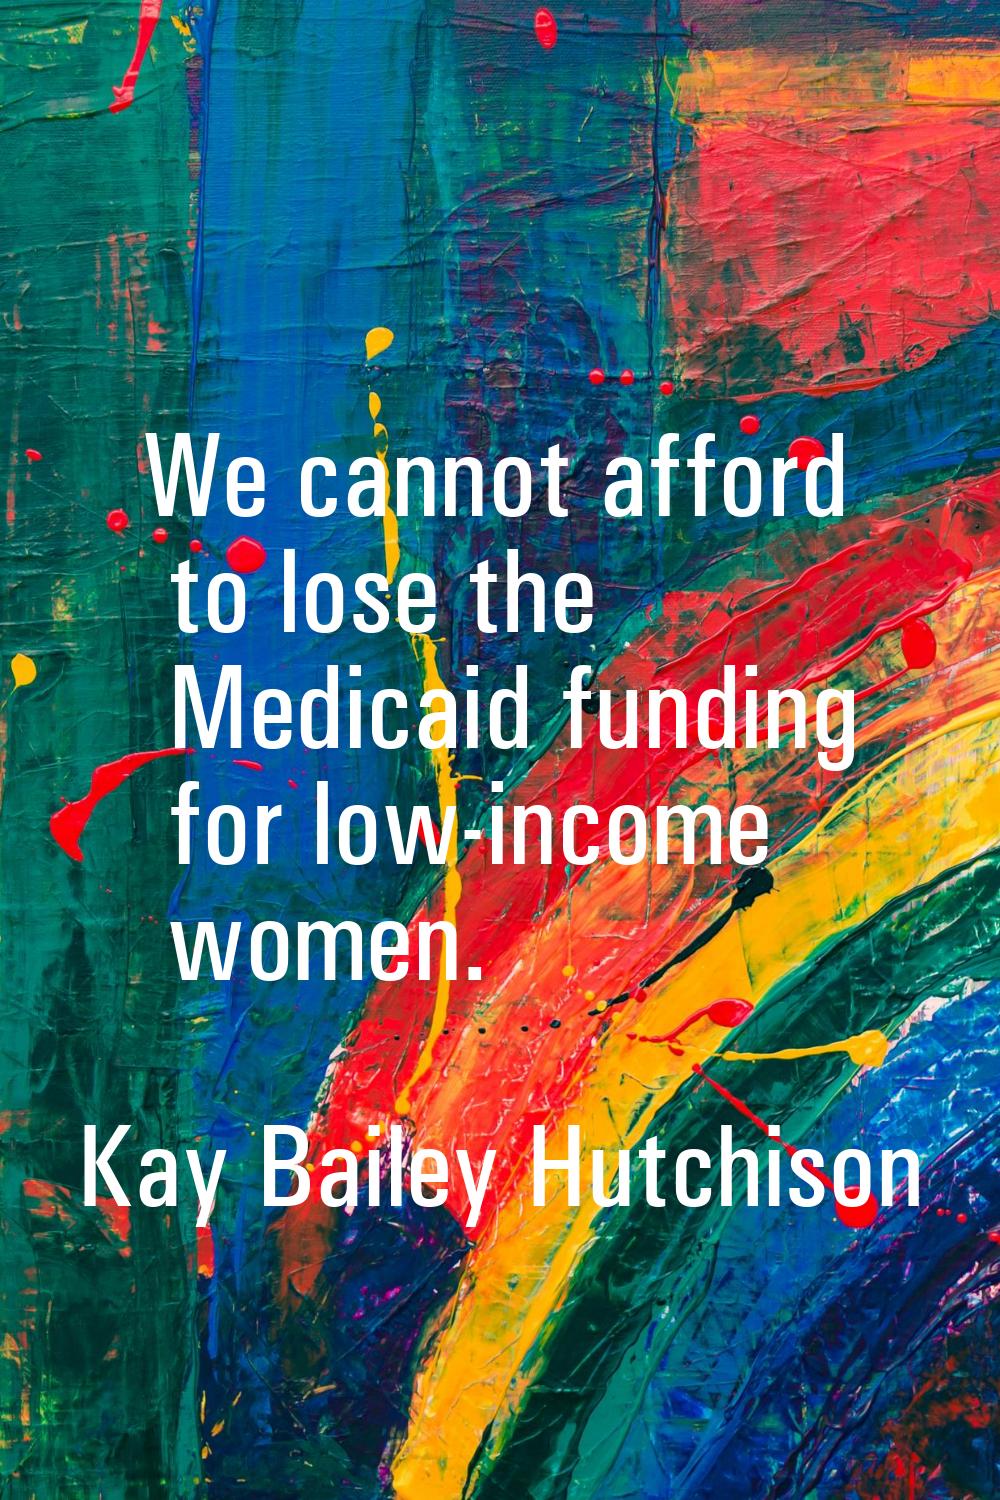 We cannot afford to lose the Medicaid funding for low-income women.